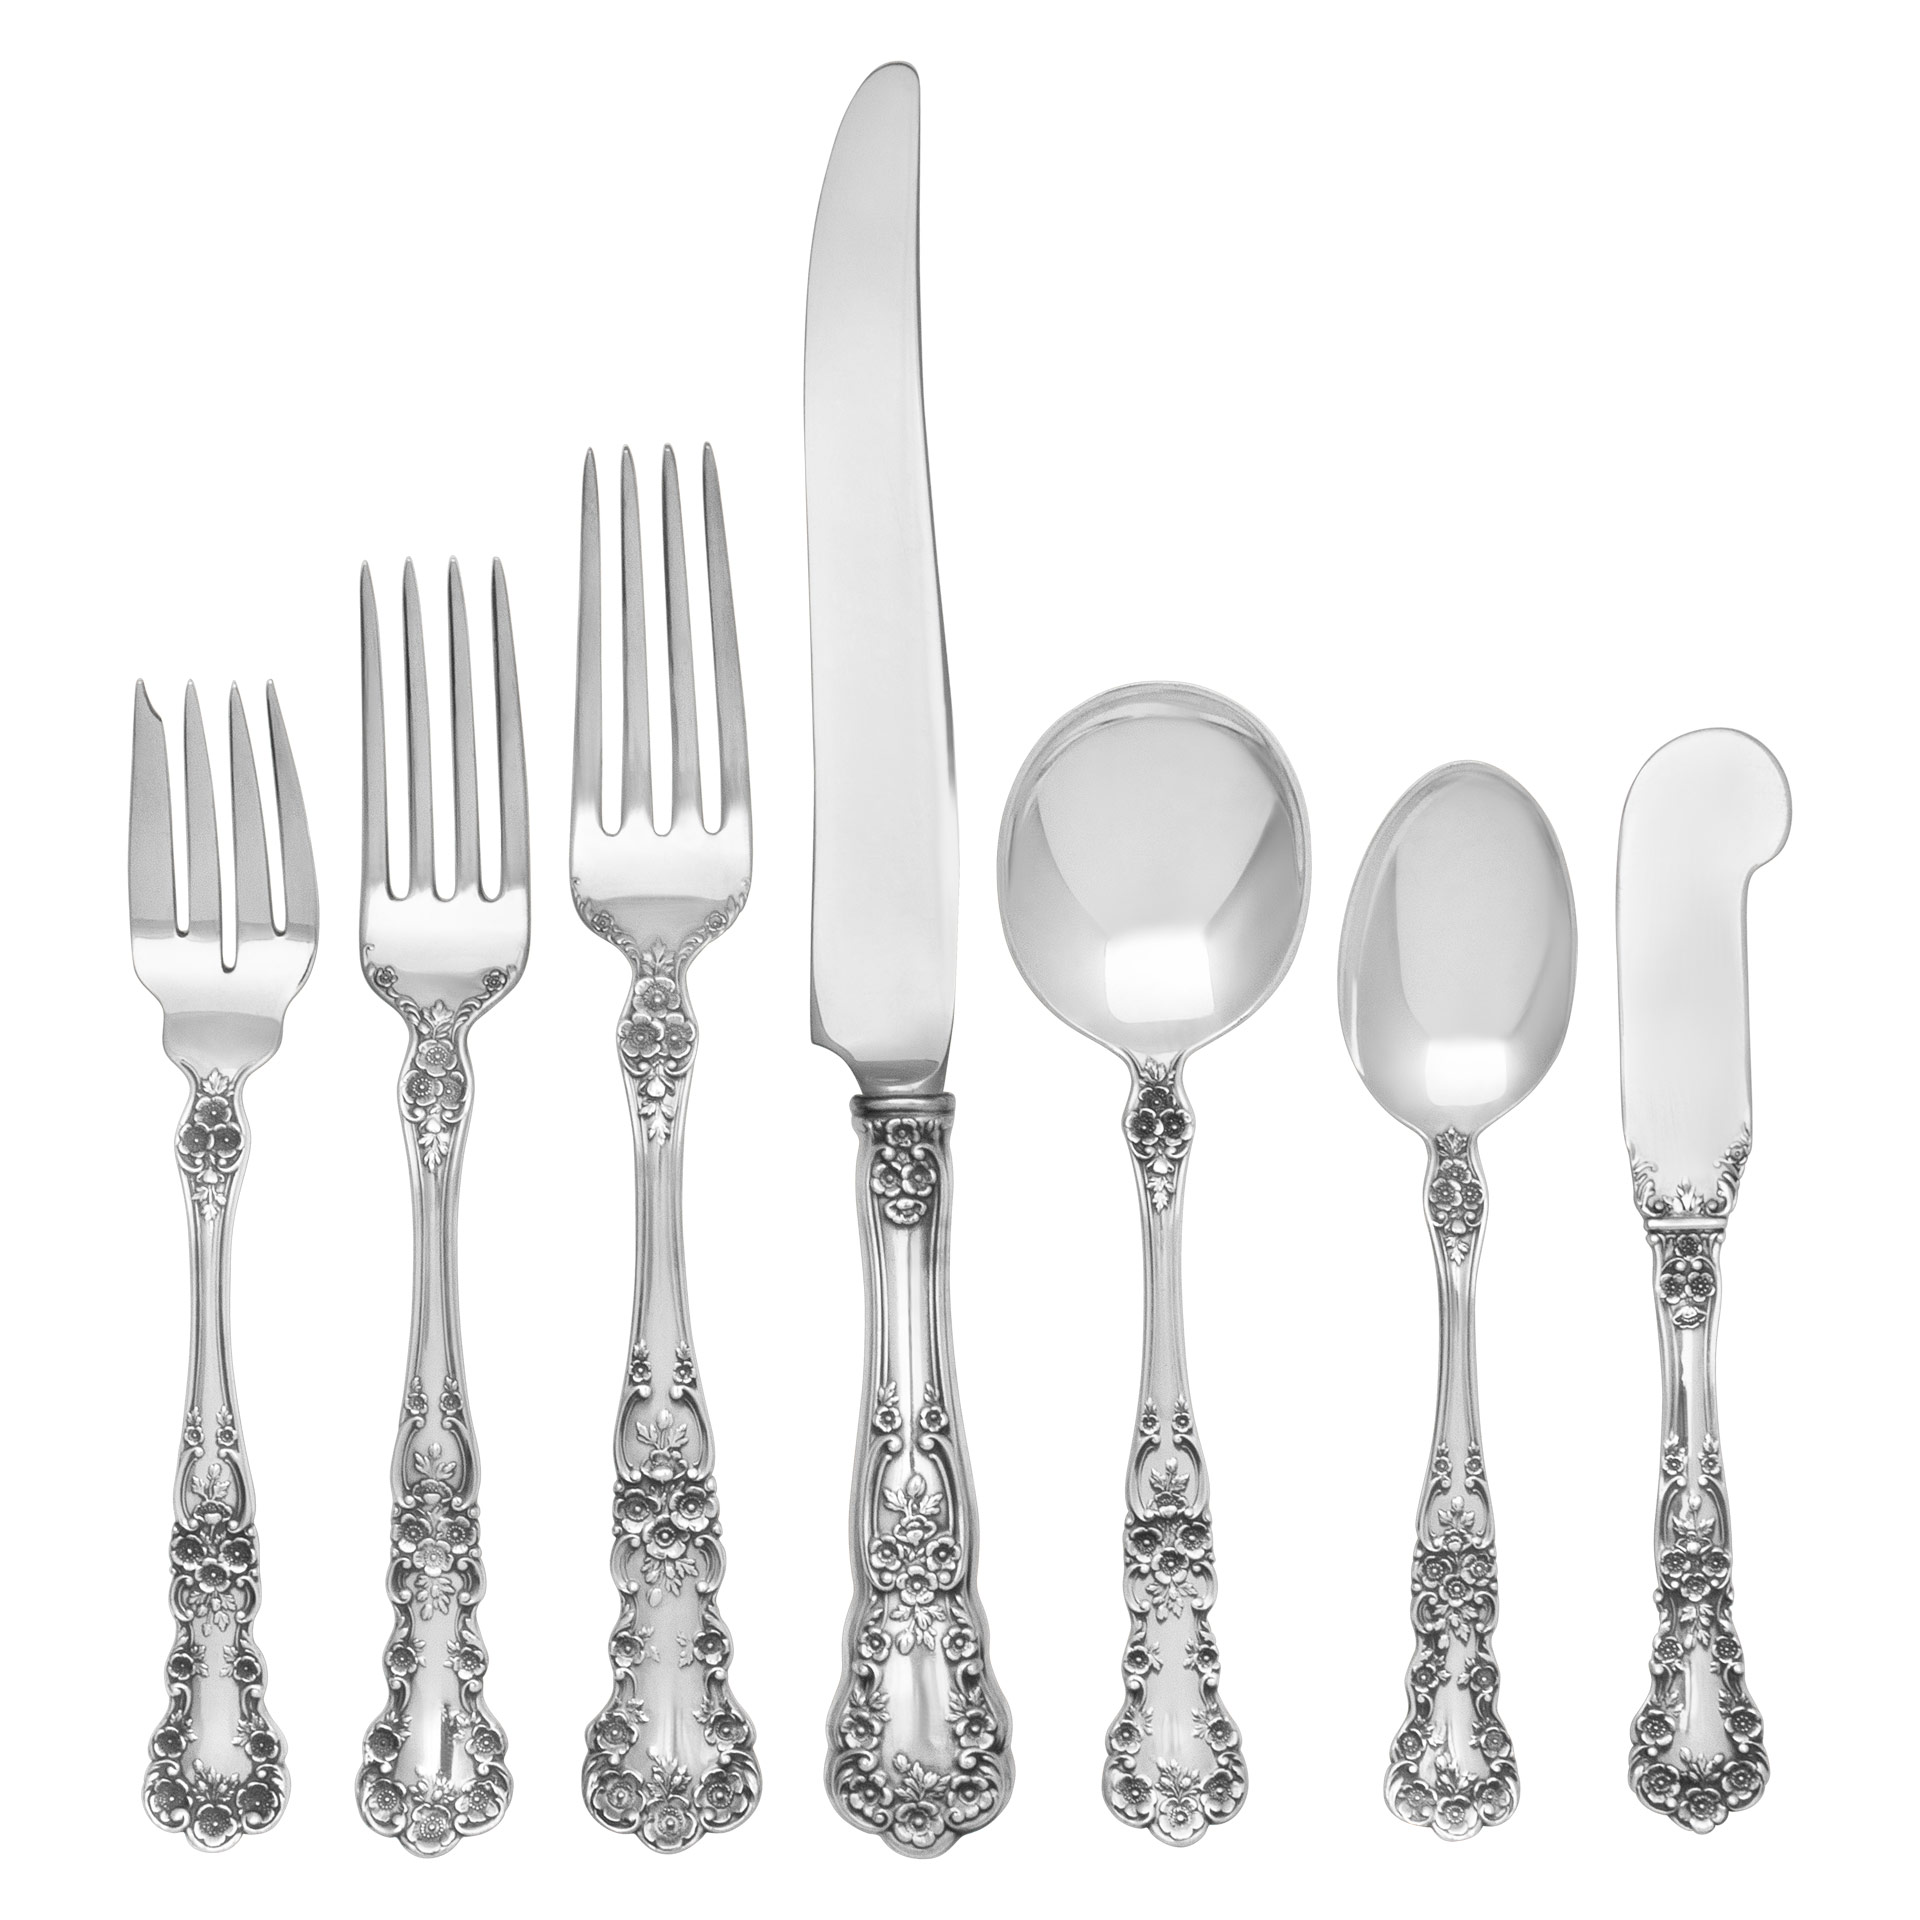 "BUTTERCUP" Sterling Silver Flatware Set, ptd by Gorham in 1899- TOTAL 115 PIECES,.